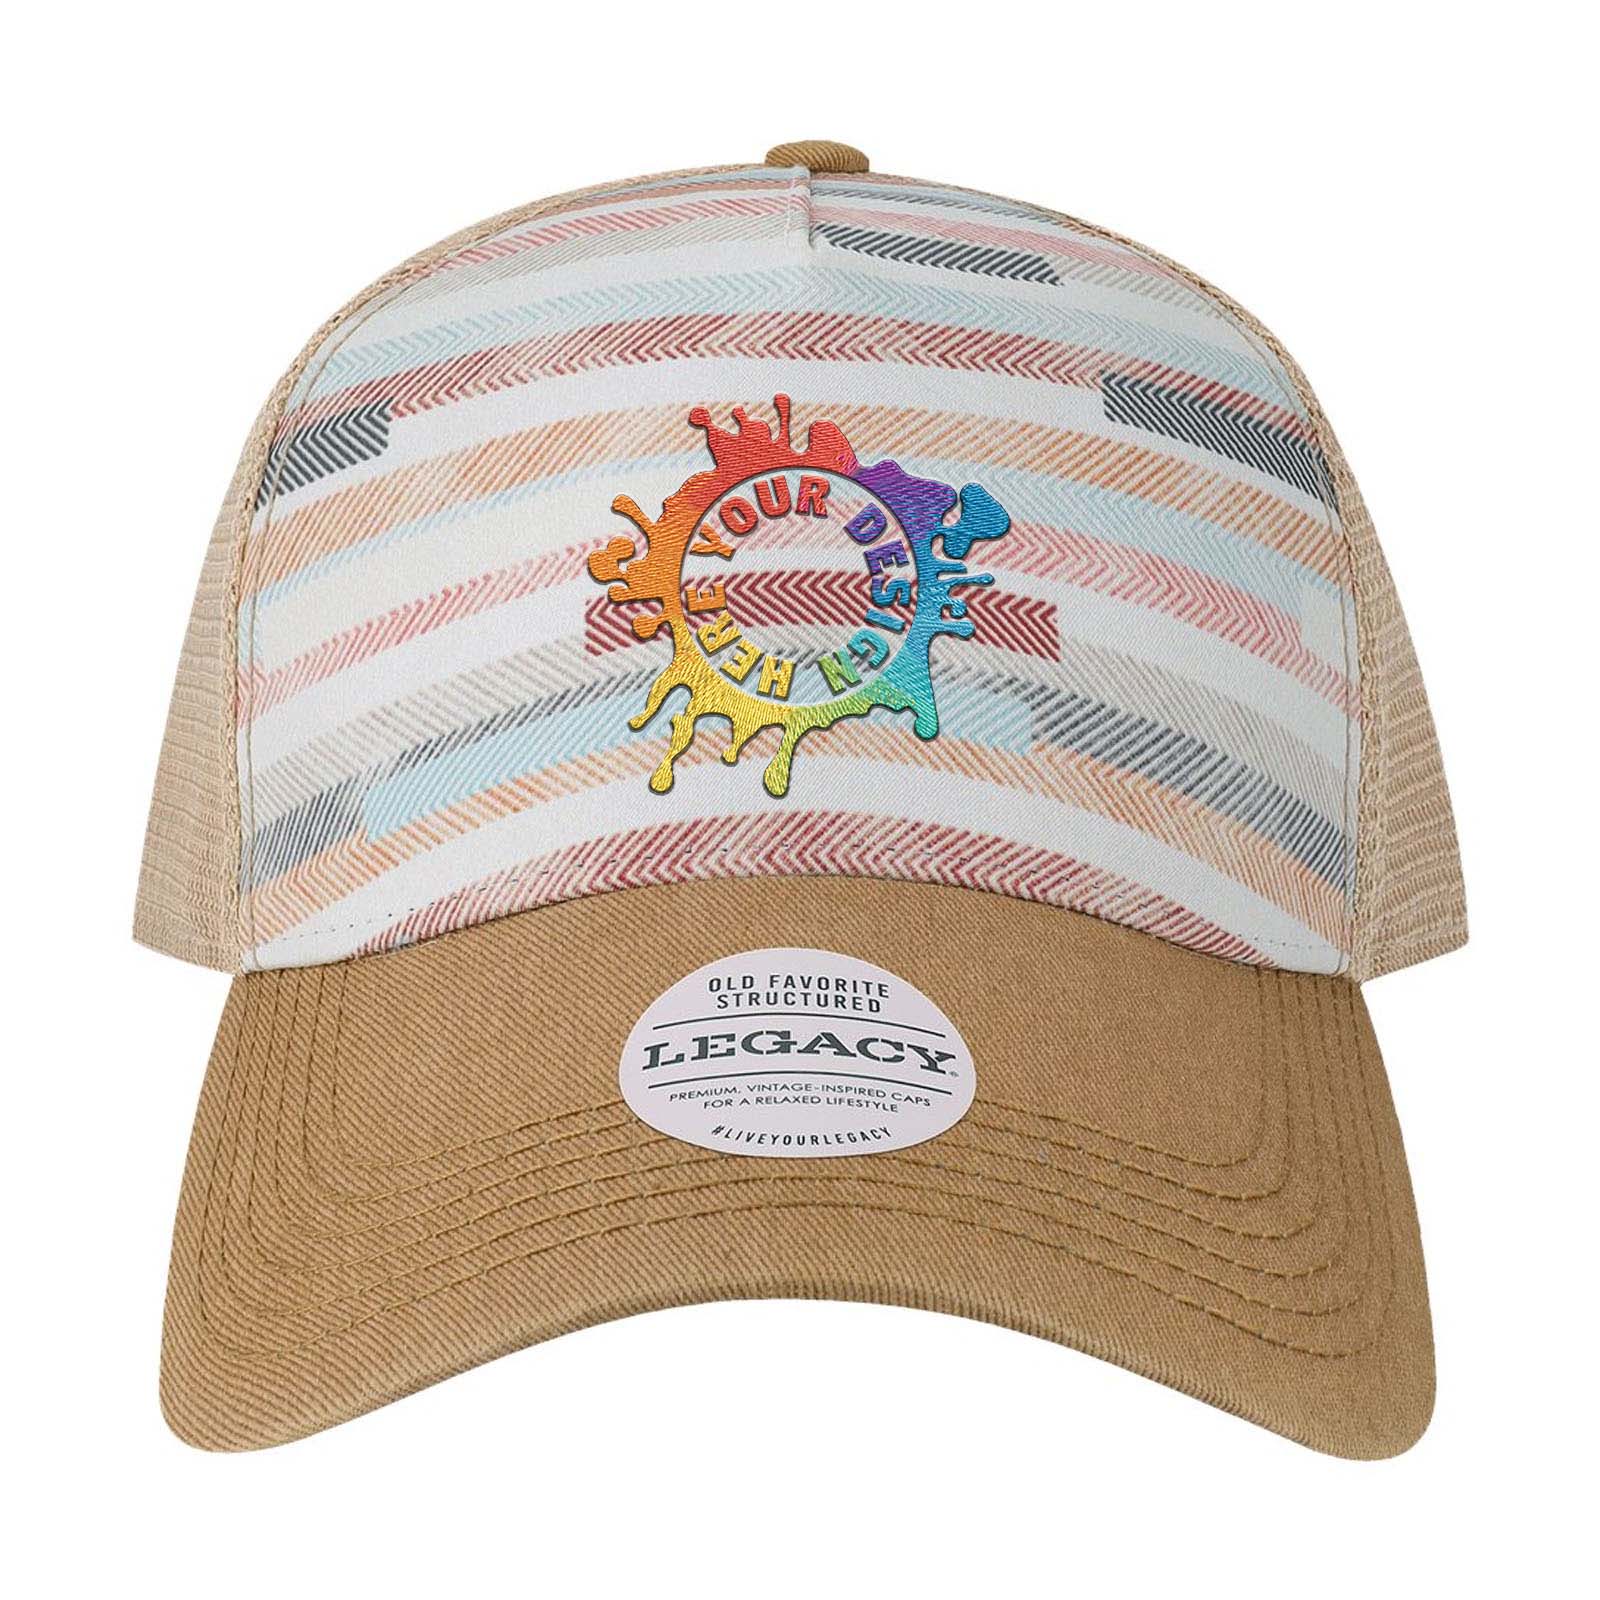 Embroidered LEGACY - Old Favorite Five-Panel Trucker Cap - Mato & Hash